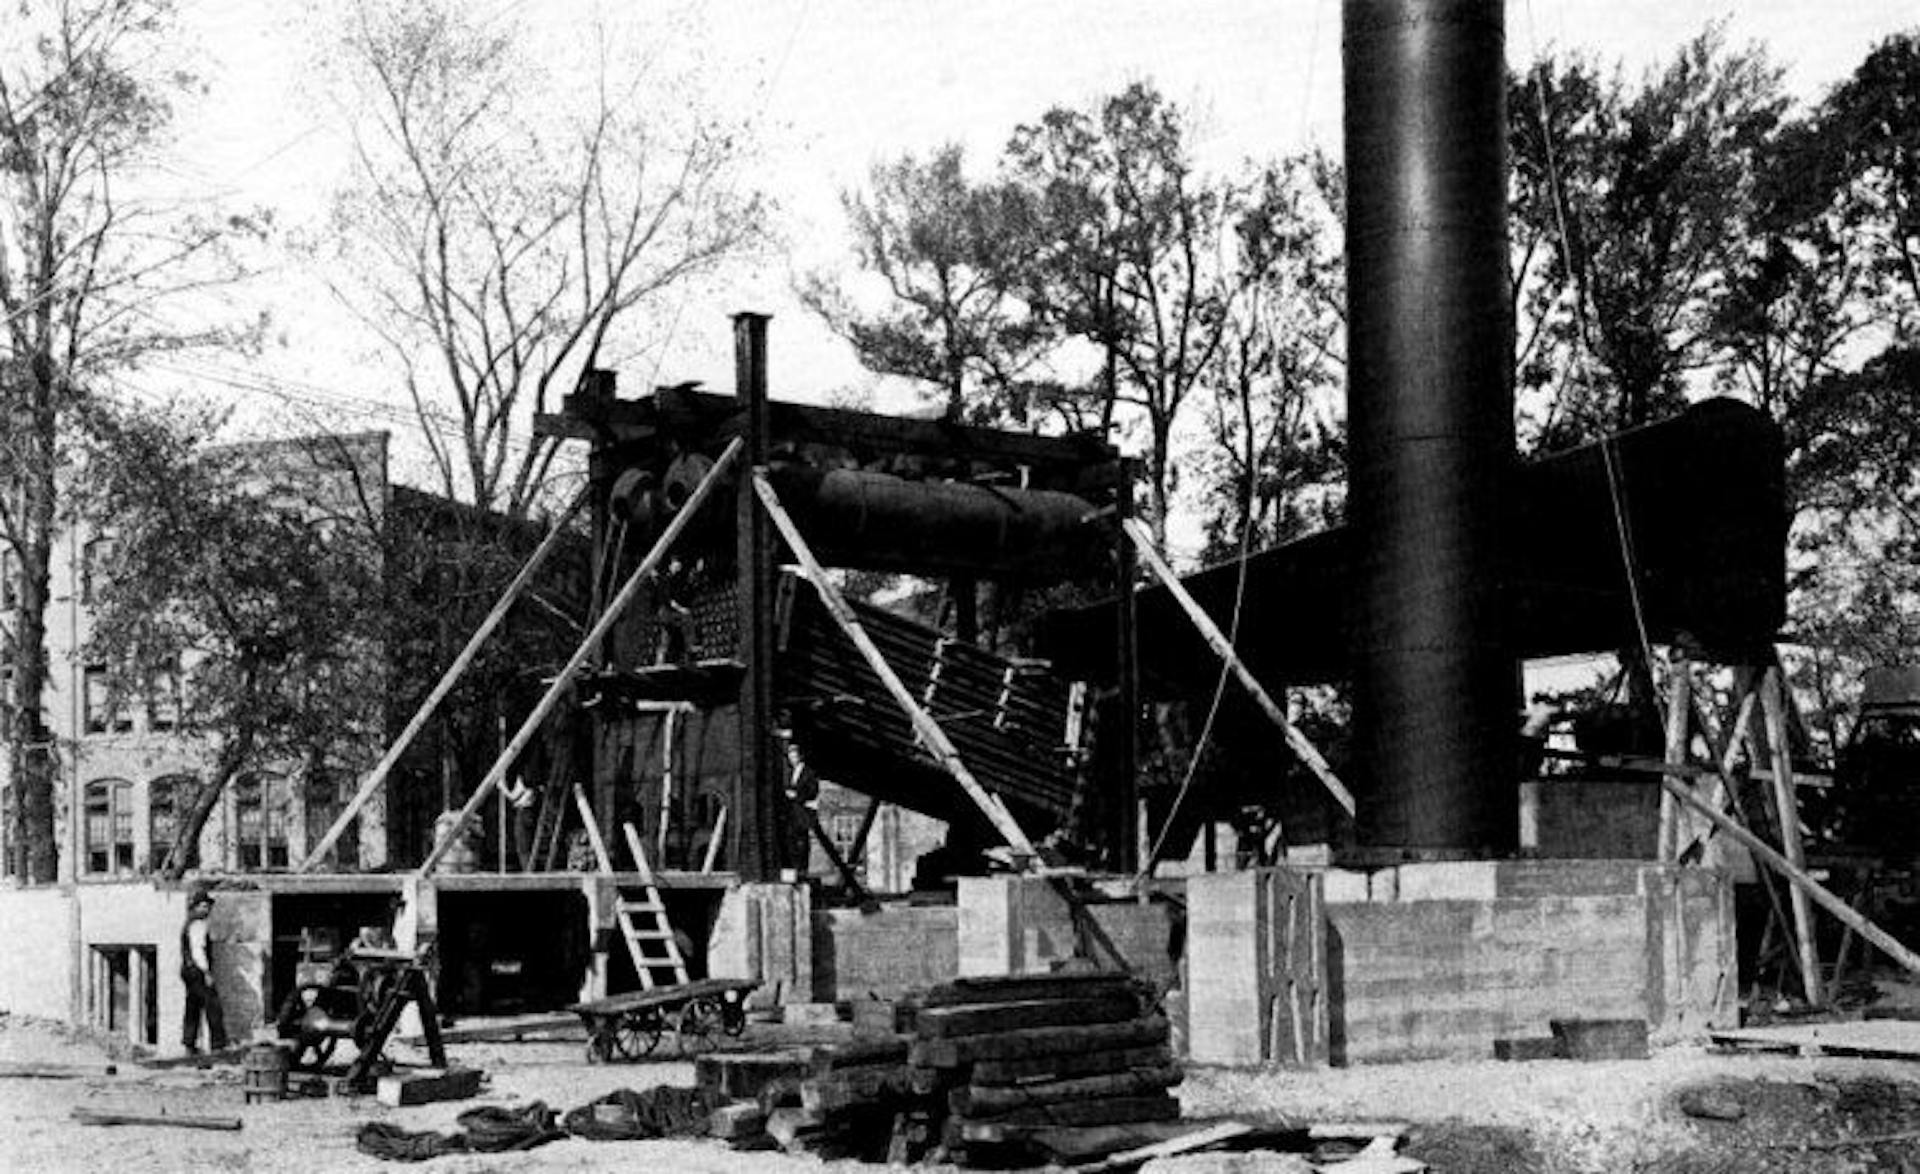 397 Horse-power Babcock & Wilcox Boiler in Course of Erection at the Plant of the Crocker Wheeler Co., Ampere, N. J.